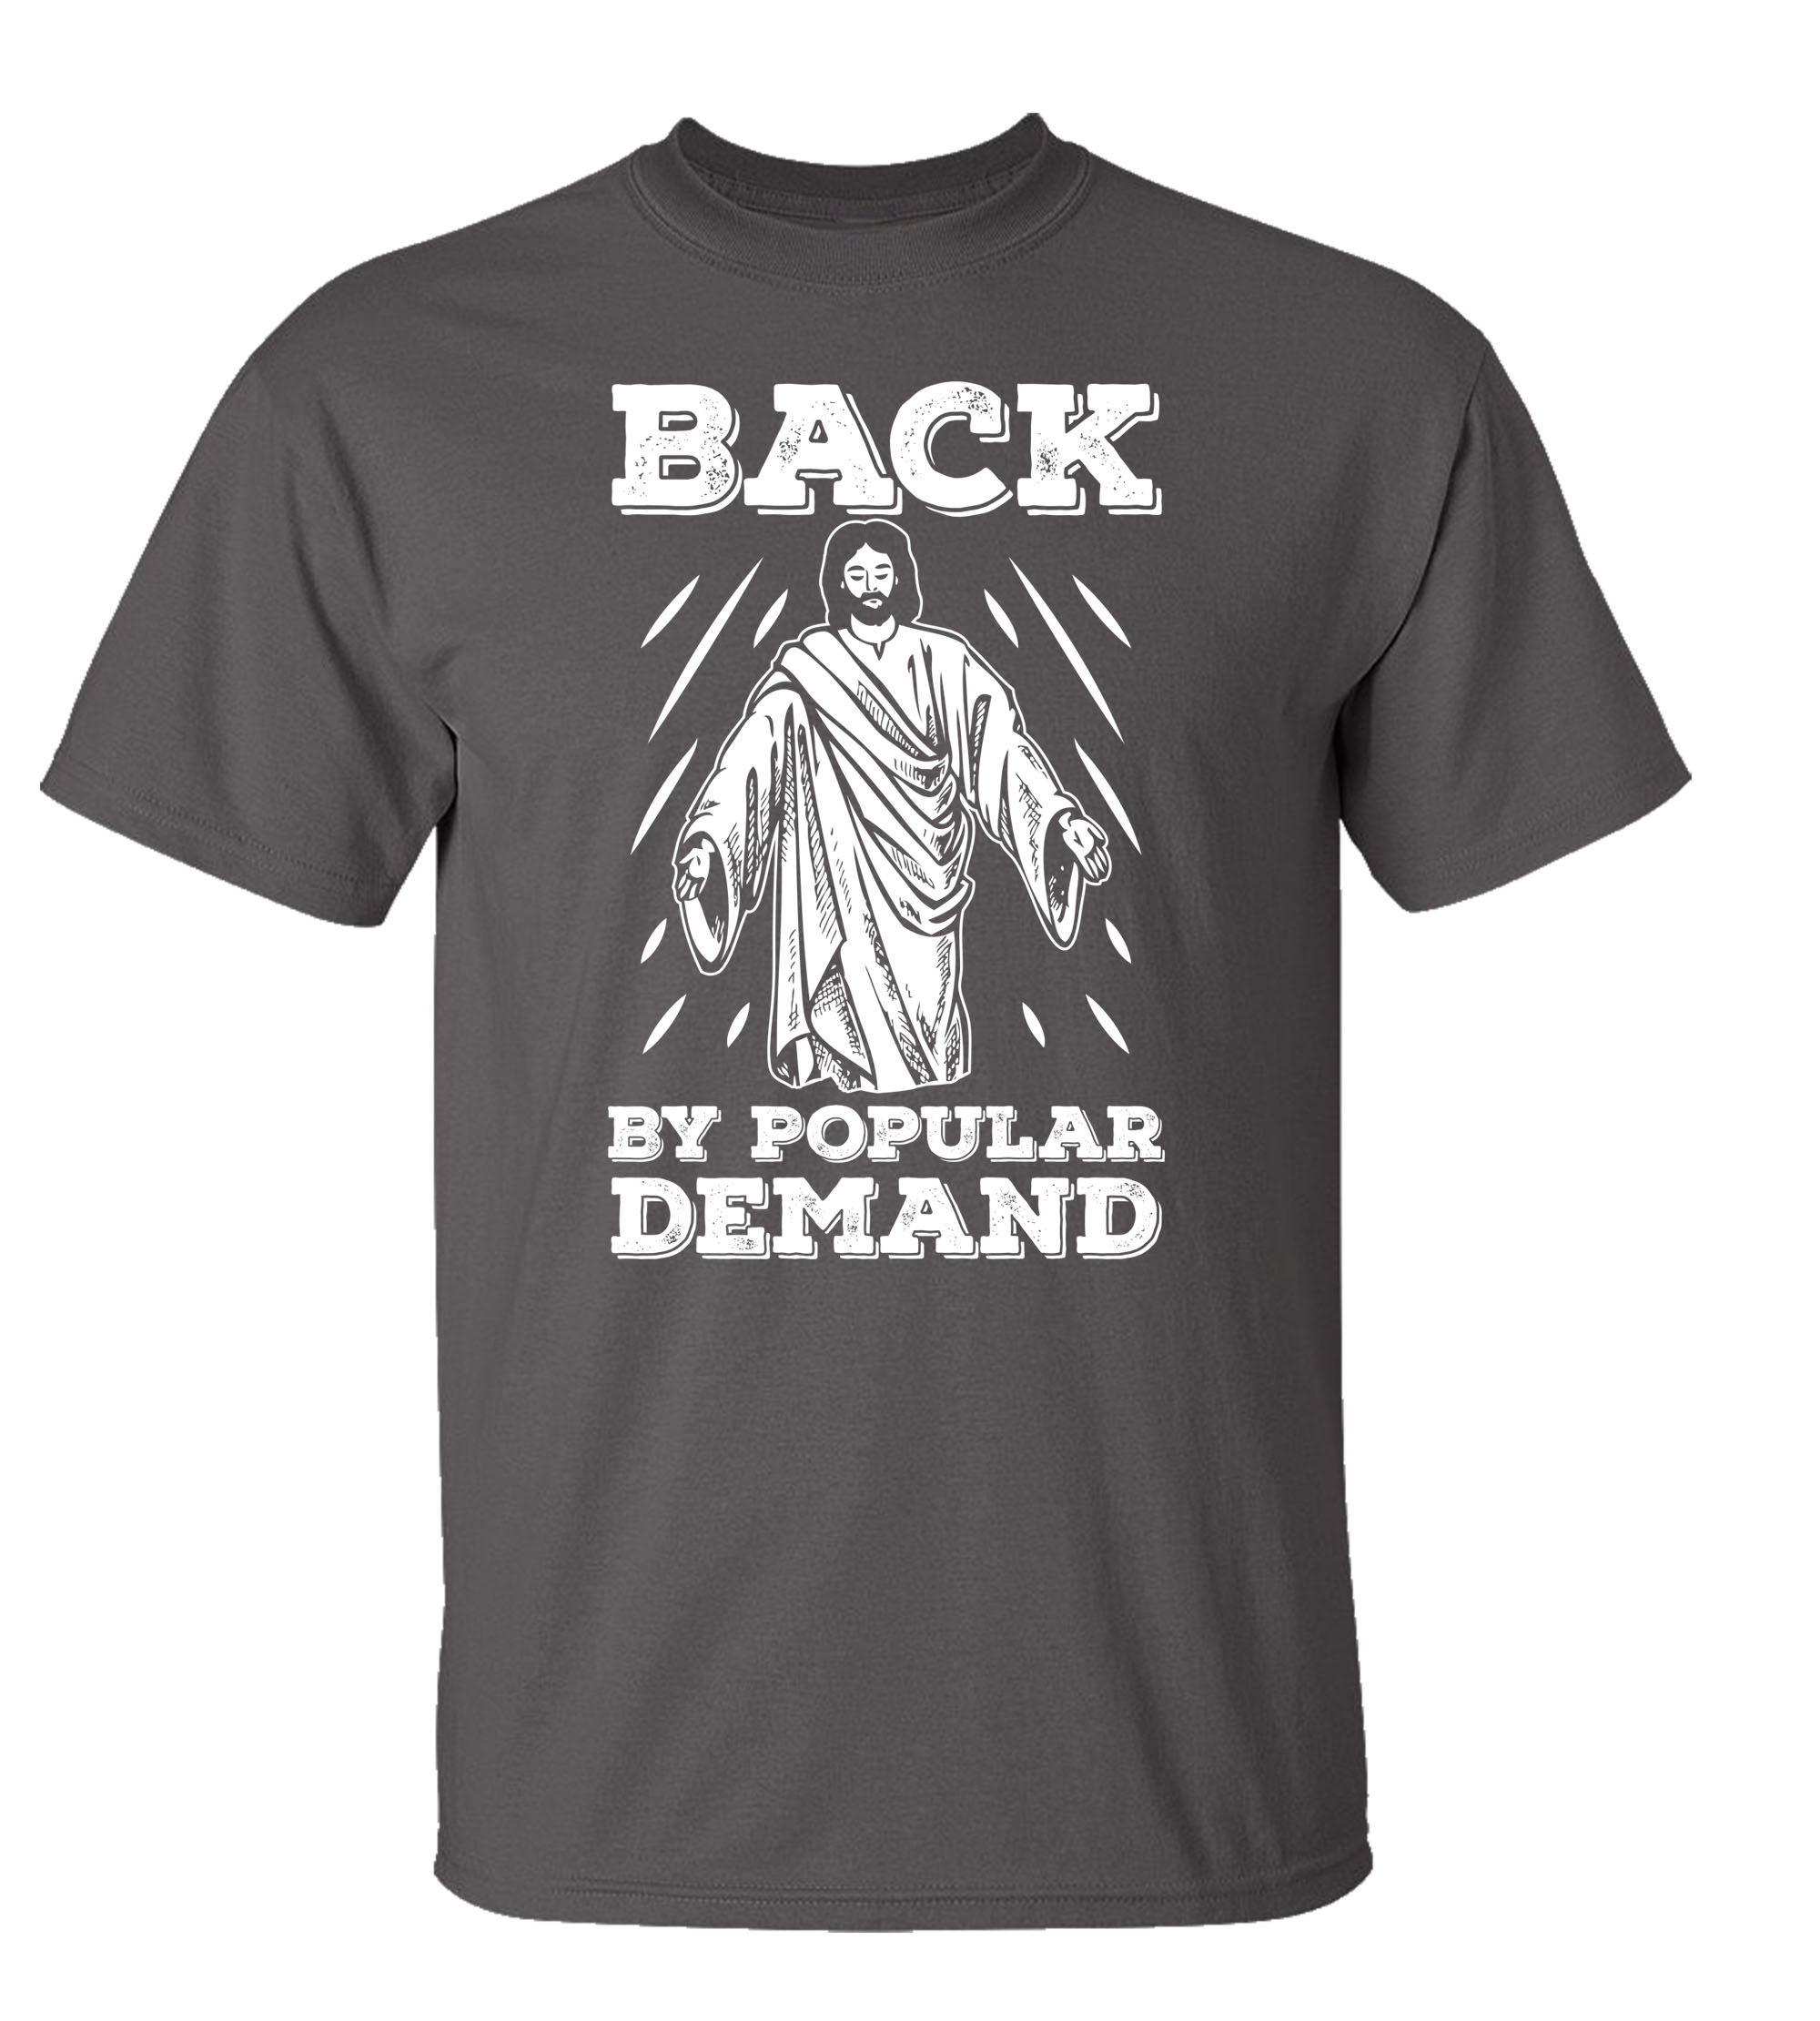 Funny Jesus: Back by Popular Demand Adult Short Sleeve T-Shirt-Charcoal-4XL - image 1 of 4